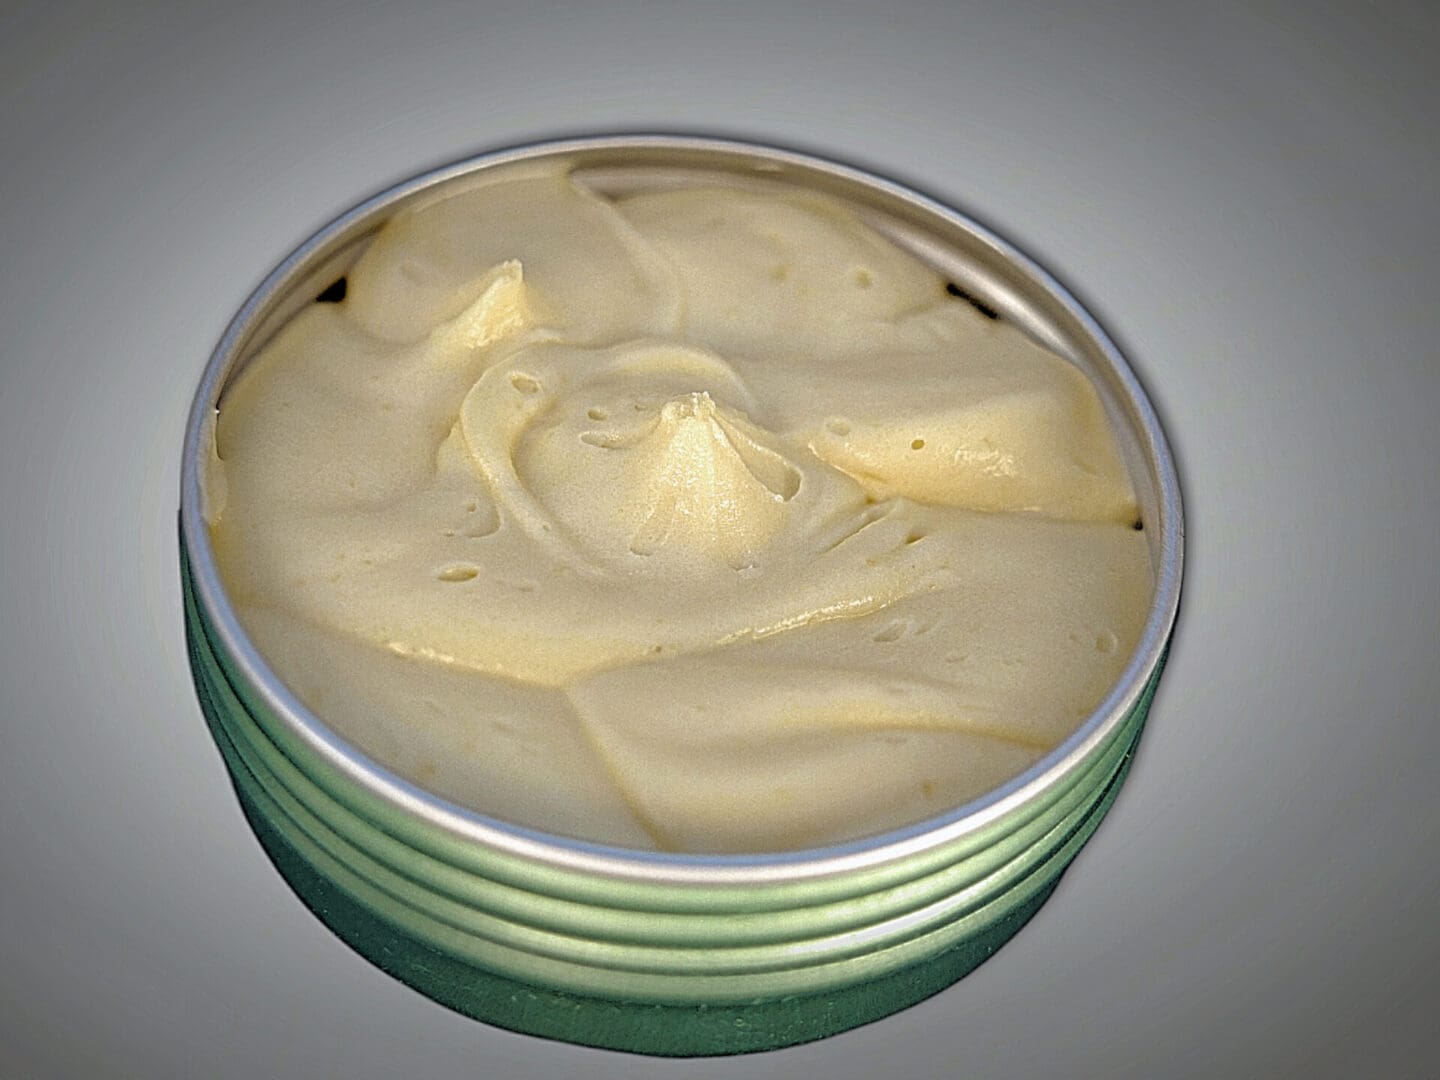 A tin of whipped cream on a grey background, resembling Nature's First Aid Body Butter.